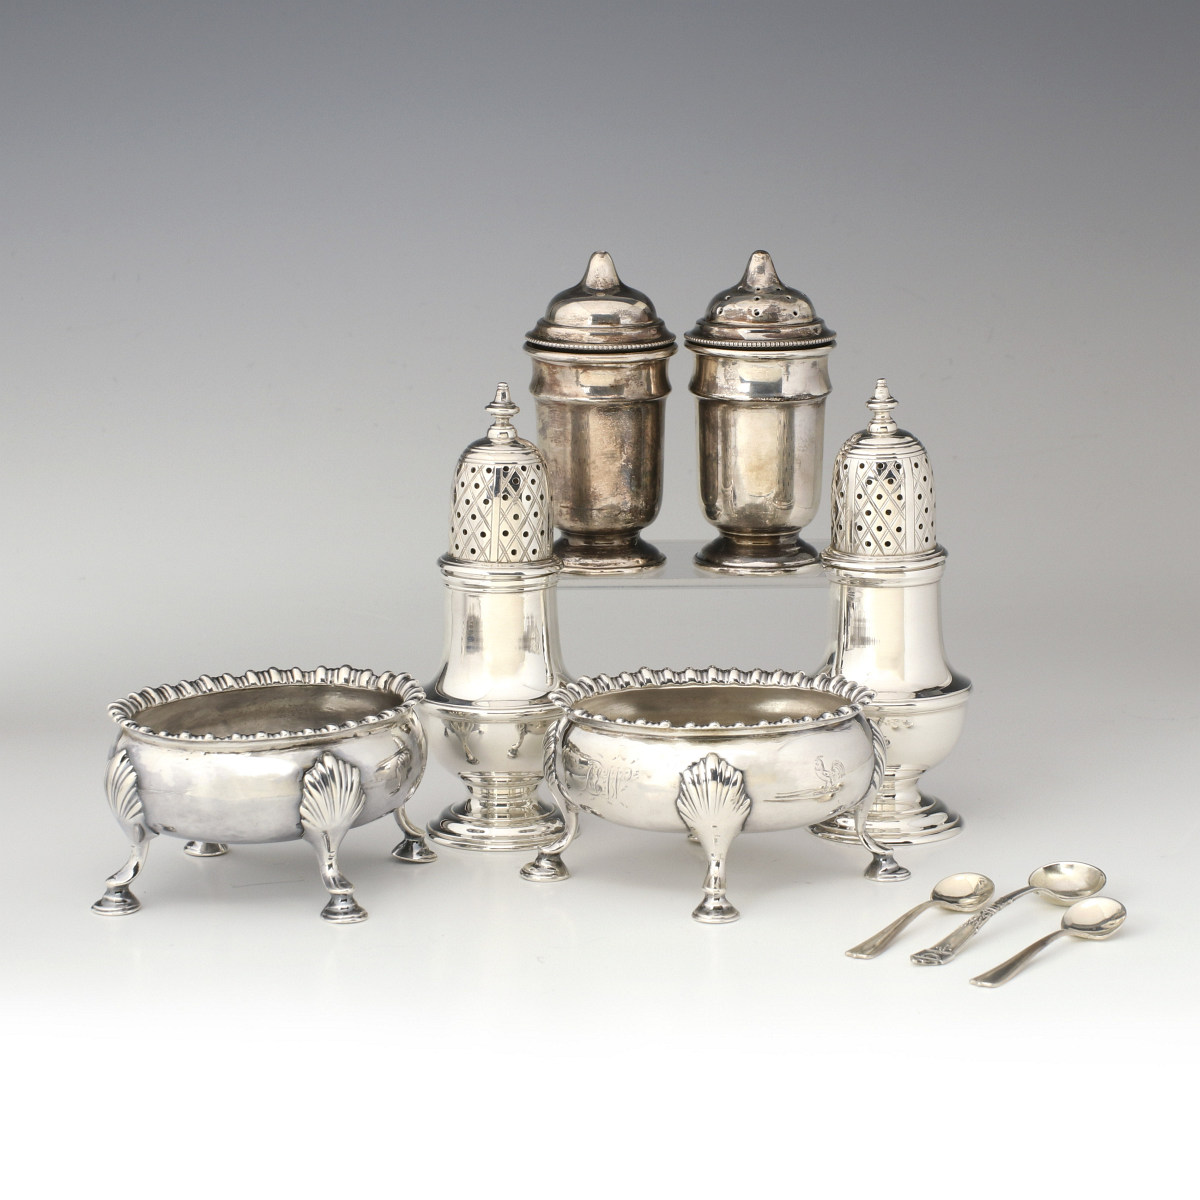 MID 20TH CENT STERLING SILVER SALT CELLARS AND SHAKERS